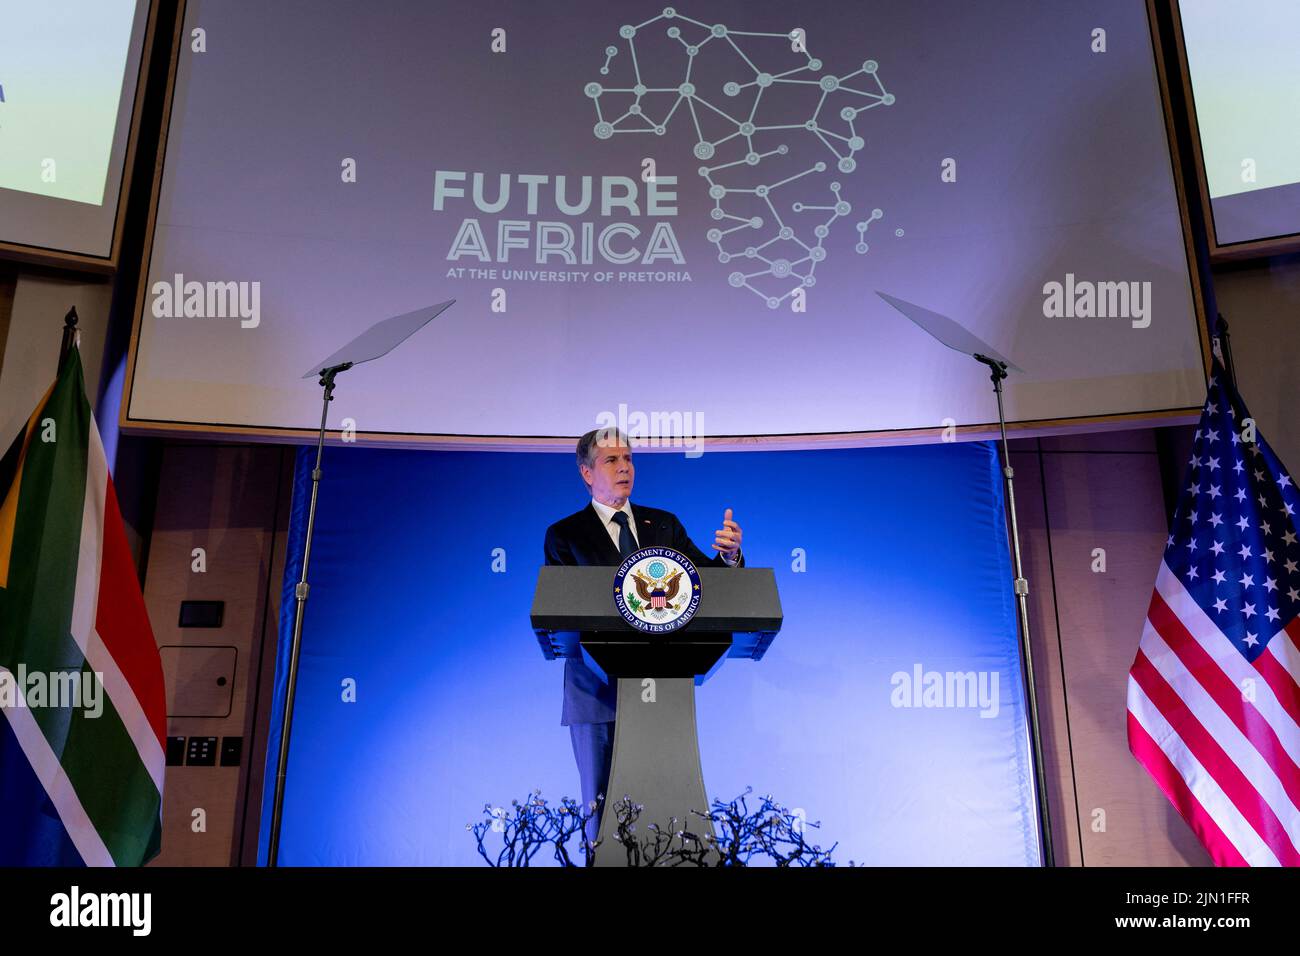 U.S. Secretary of State Antony Blinken gives a speech on the U.S. Africa Strategy at the University of Pretoria's Future Africa Campus in Pretoria, South Africa, August 8, 2022. Andrew Harnik/Pool via REUTERS Stock Photo